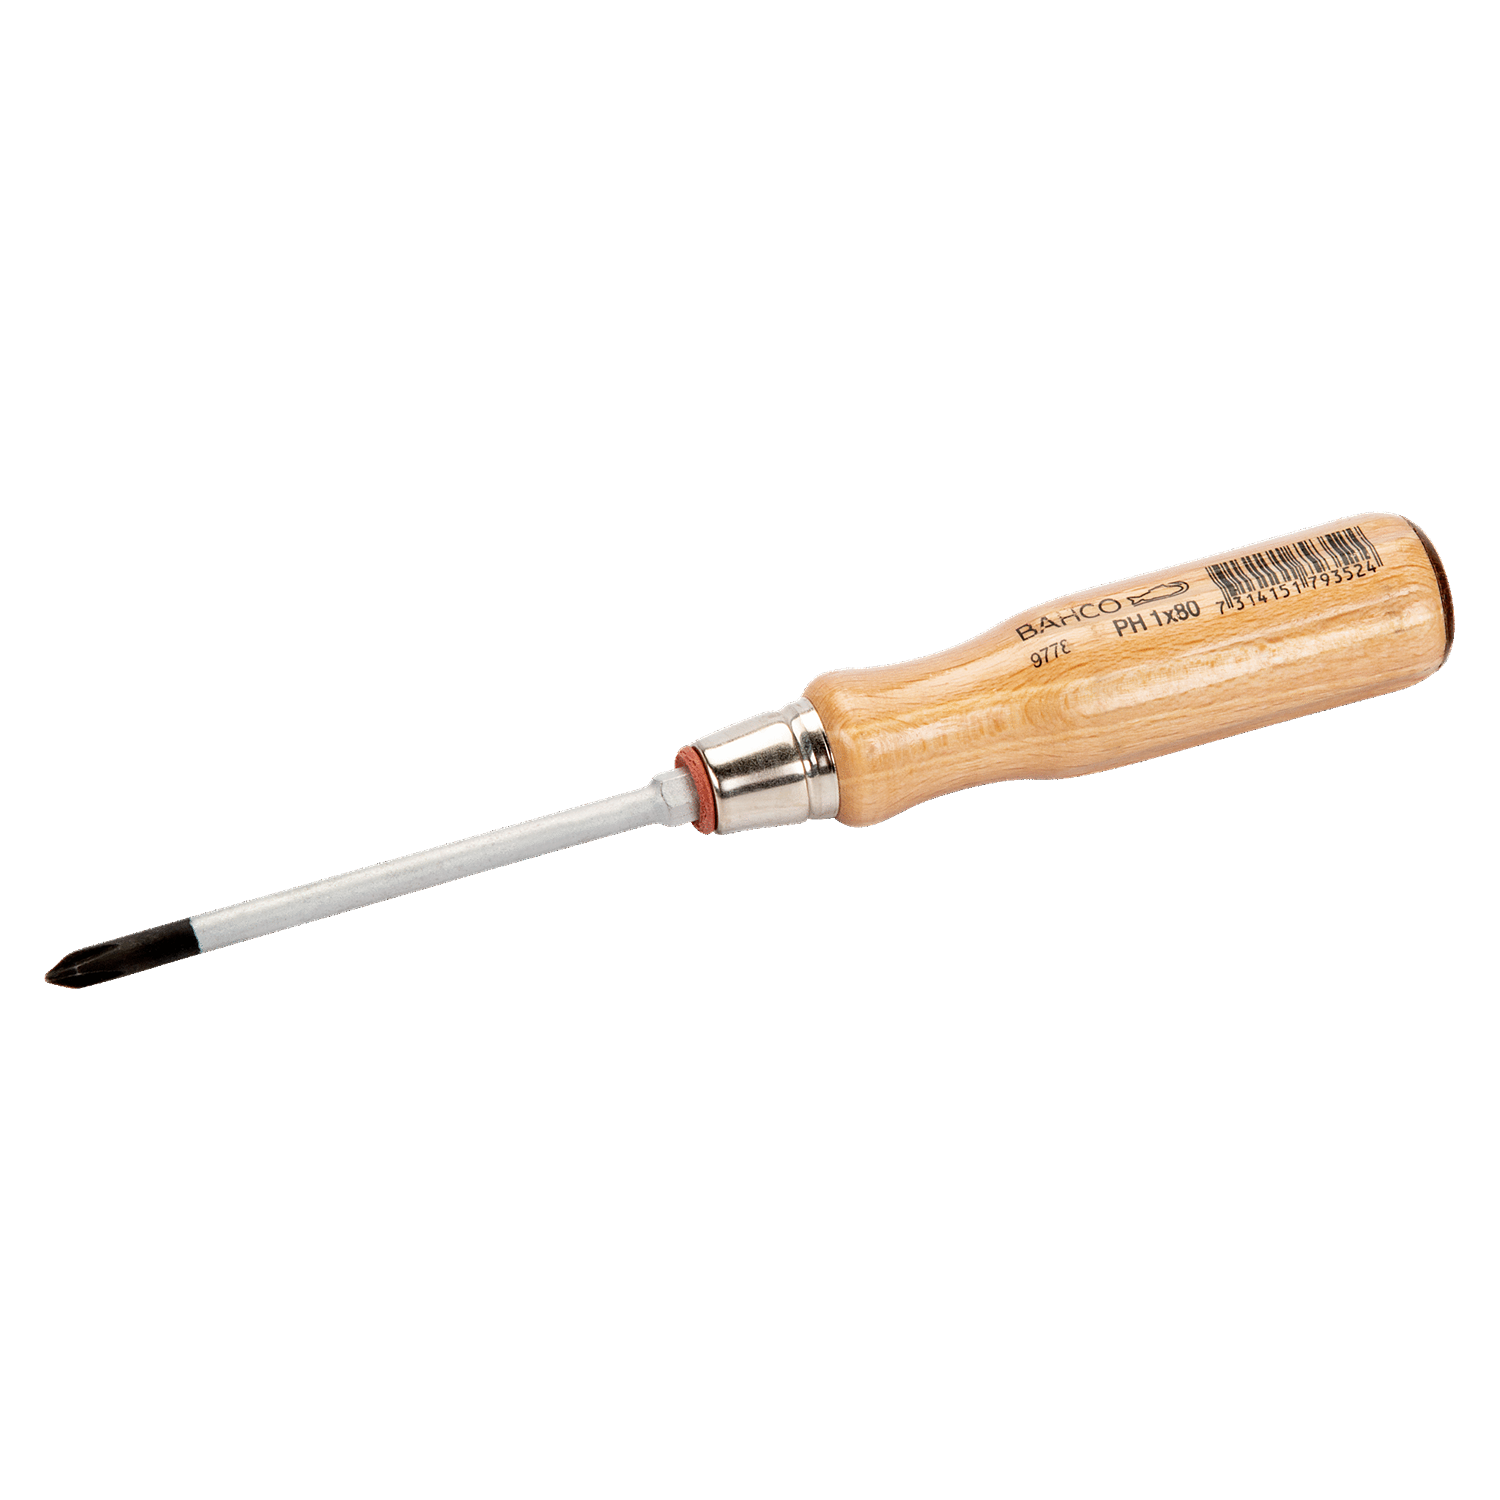 BAHCO 9778 Phillips Screwdriver with Wooden Handle PH1-PH3 - Premium Phillips Screwdriver from BAHCO - Shop now at Yew Aik.